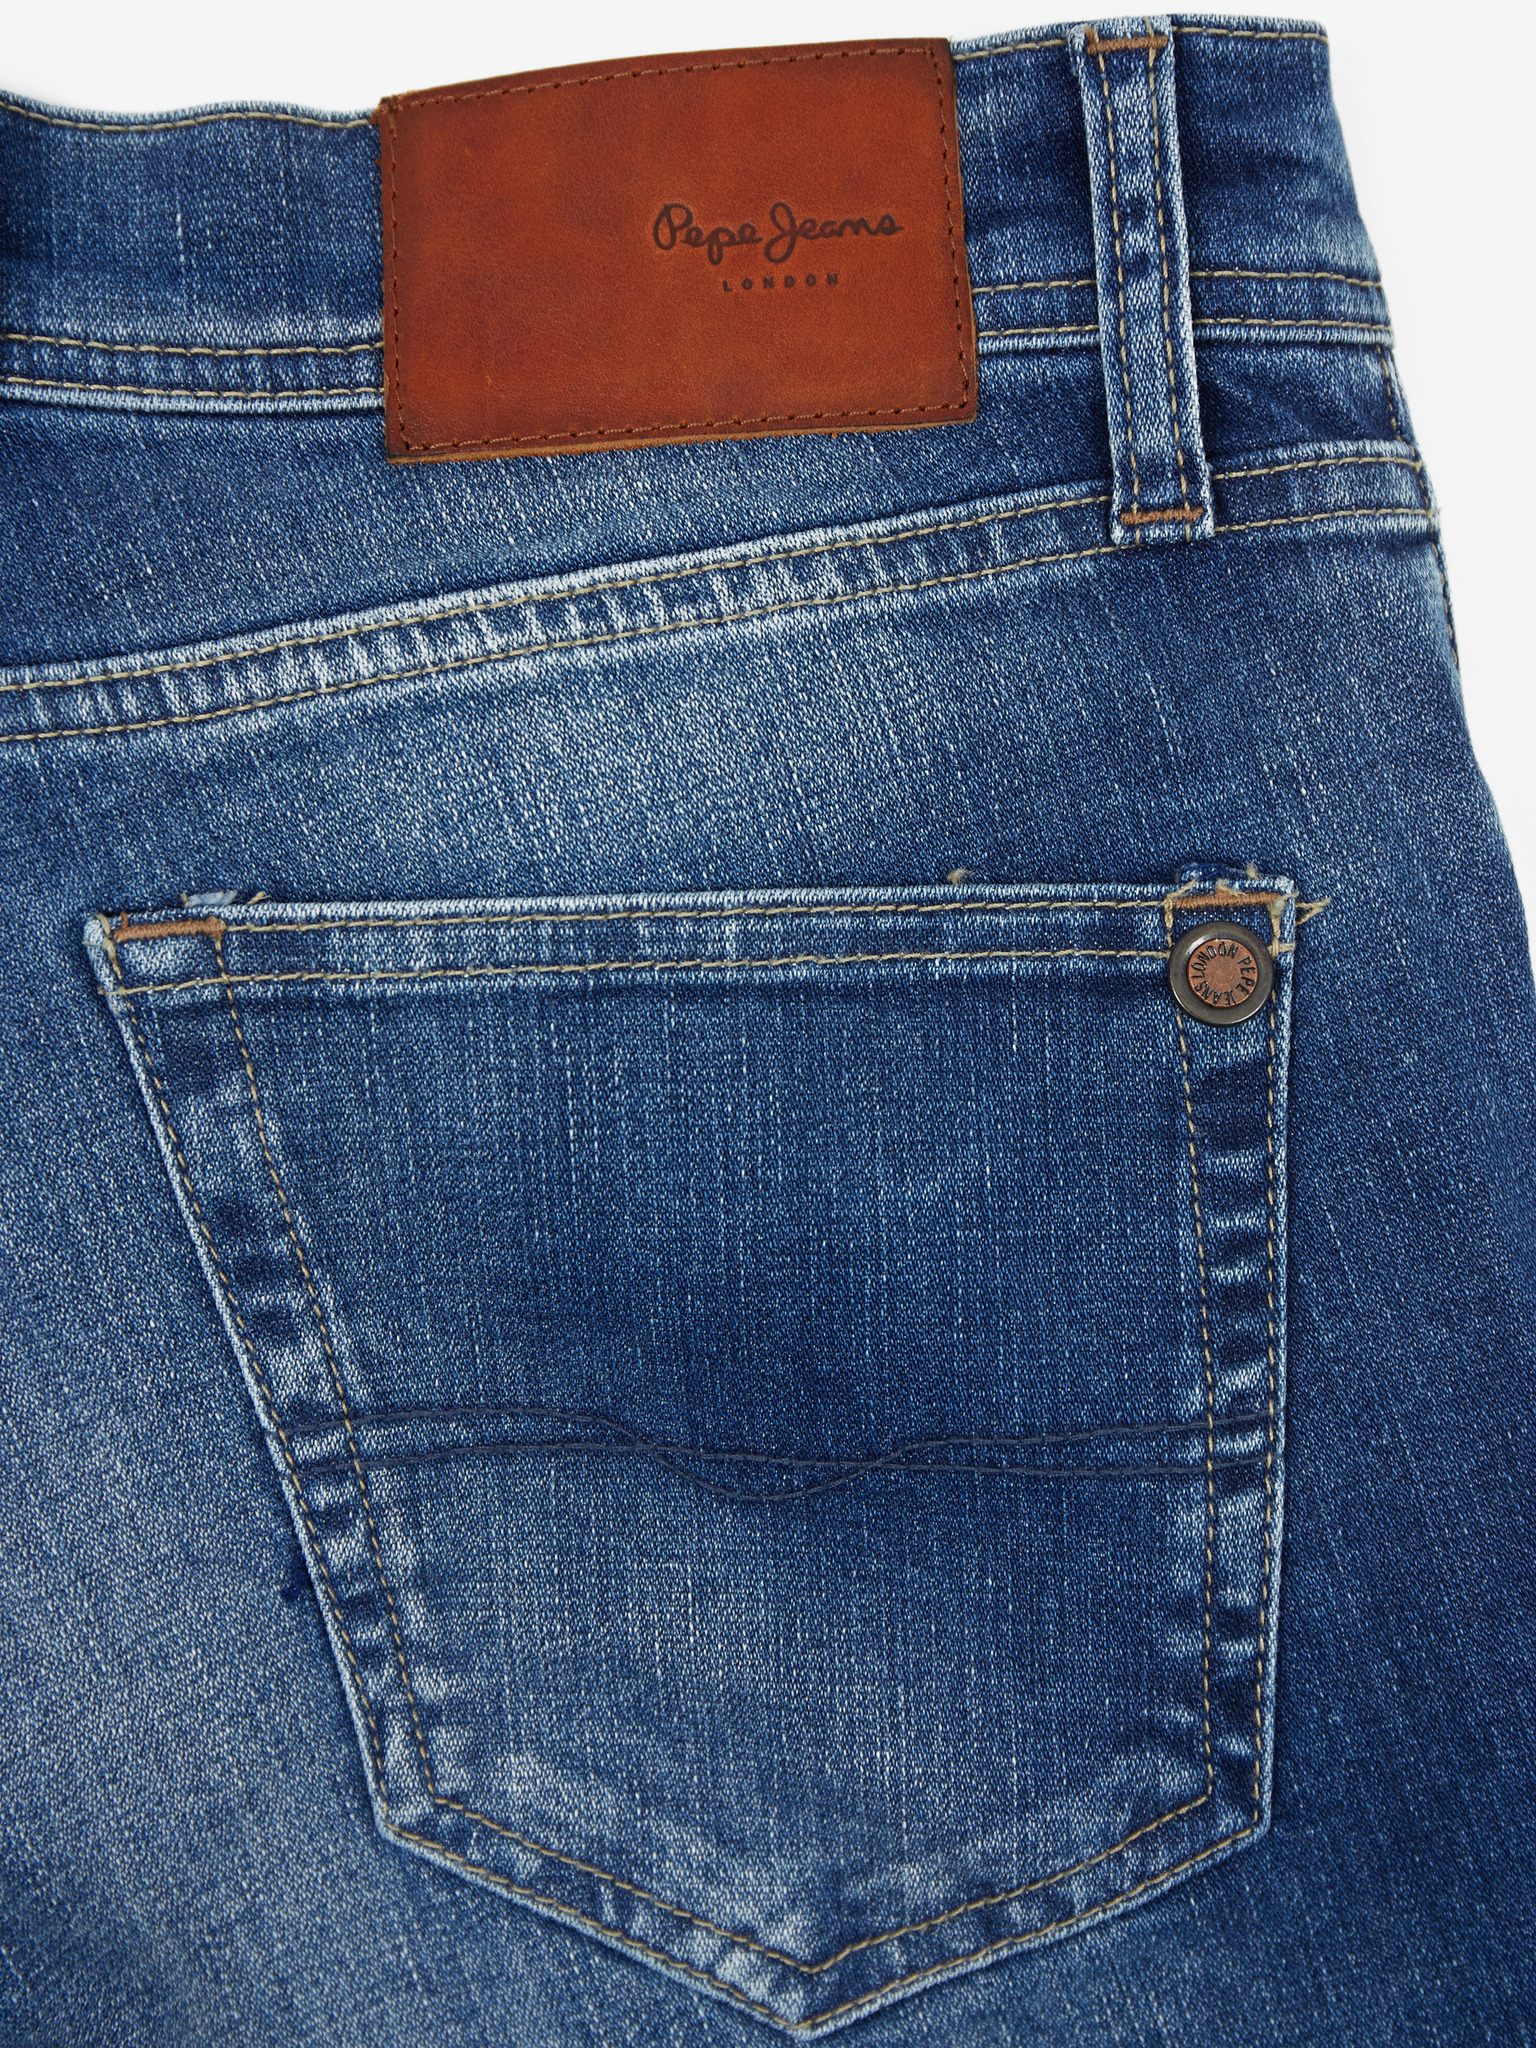 - Jeans Pepe Cane Jeans